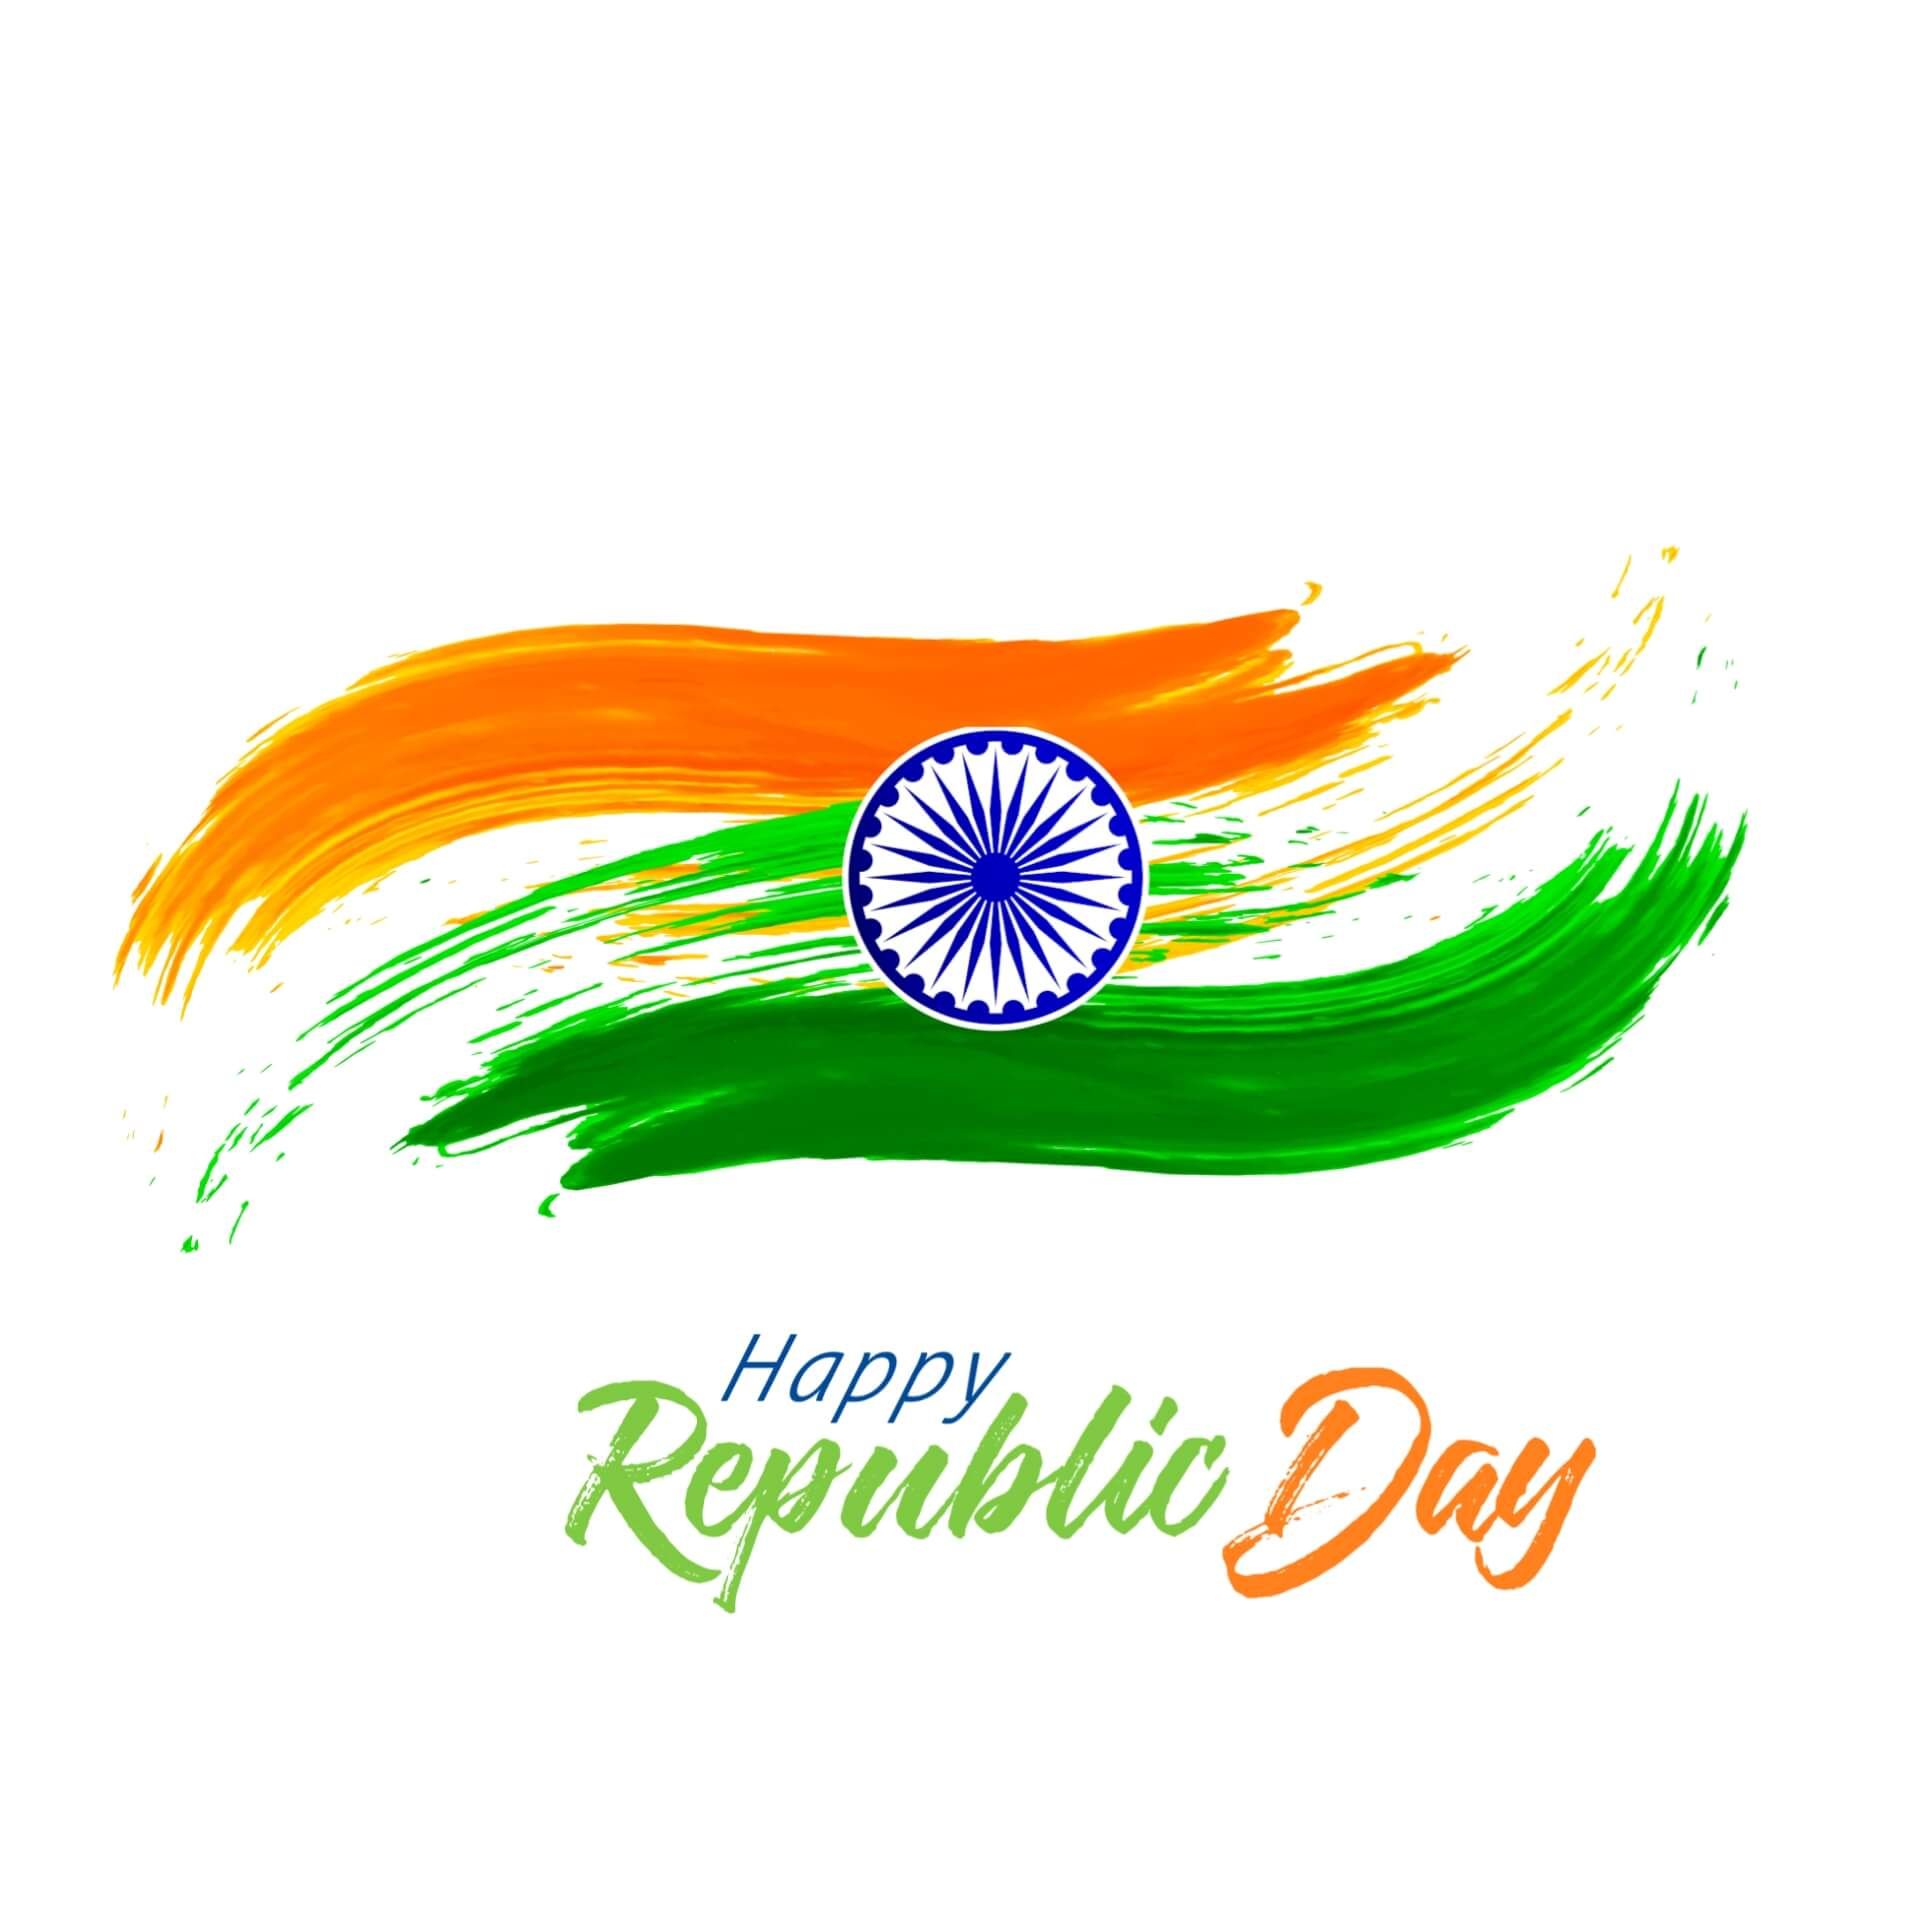 BEST Happy Republic Day Image, Photo & Picture 2022. Republic day, India republic day image, Republic day message